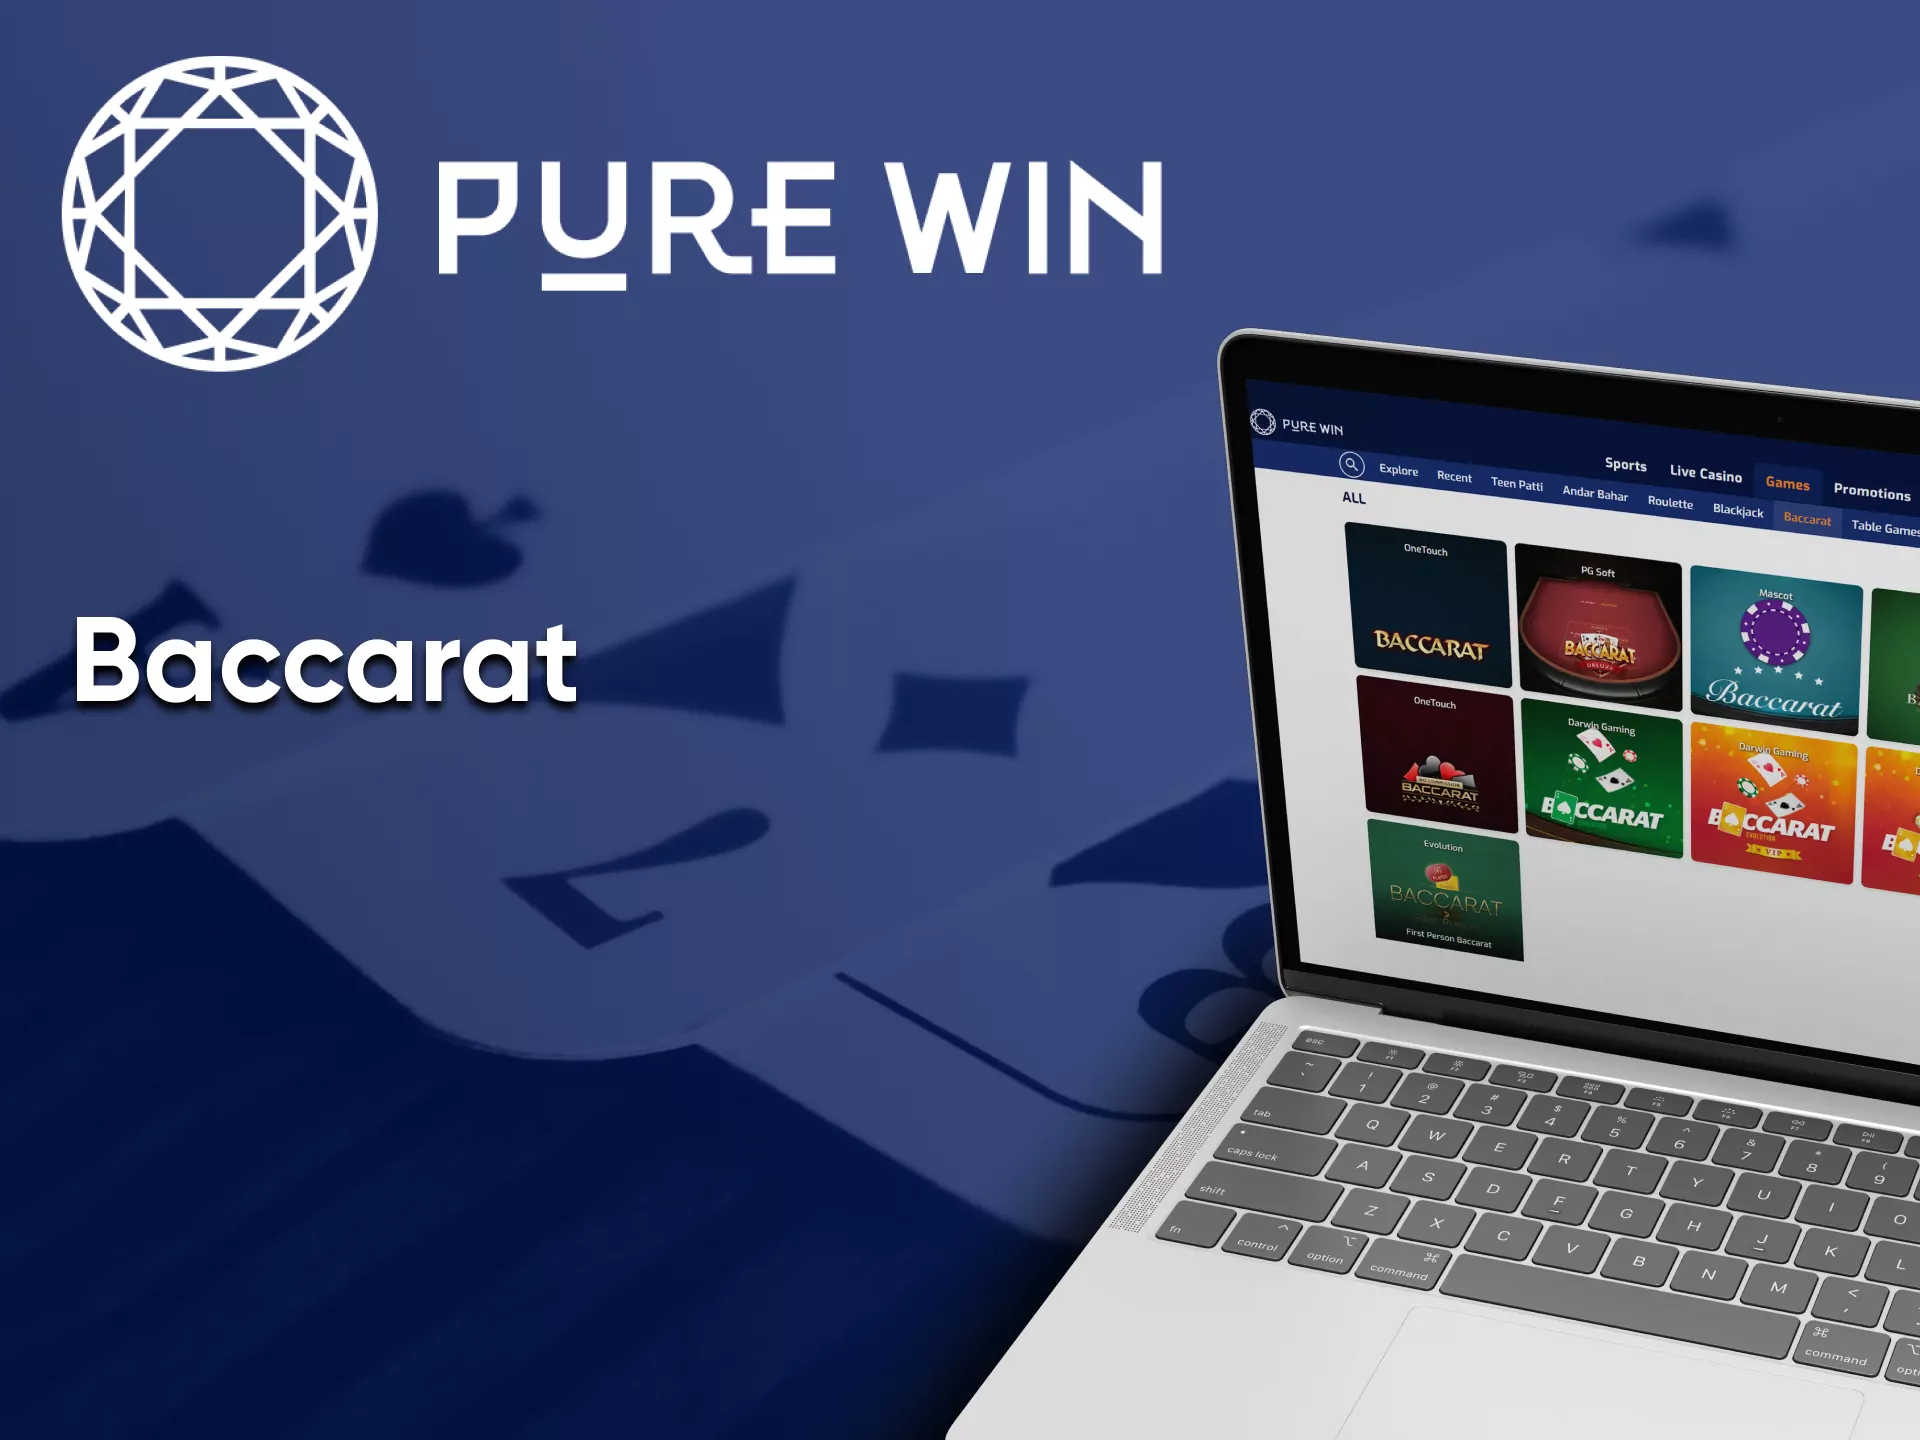 Choose a section with Baccarat from Pure Win.